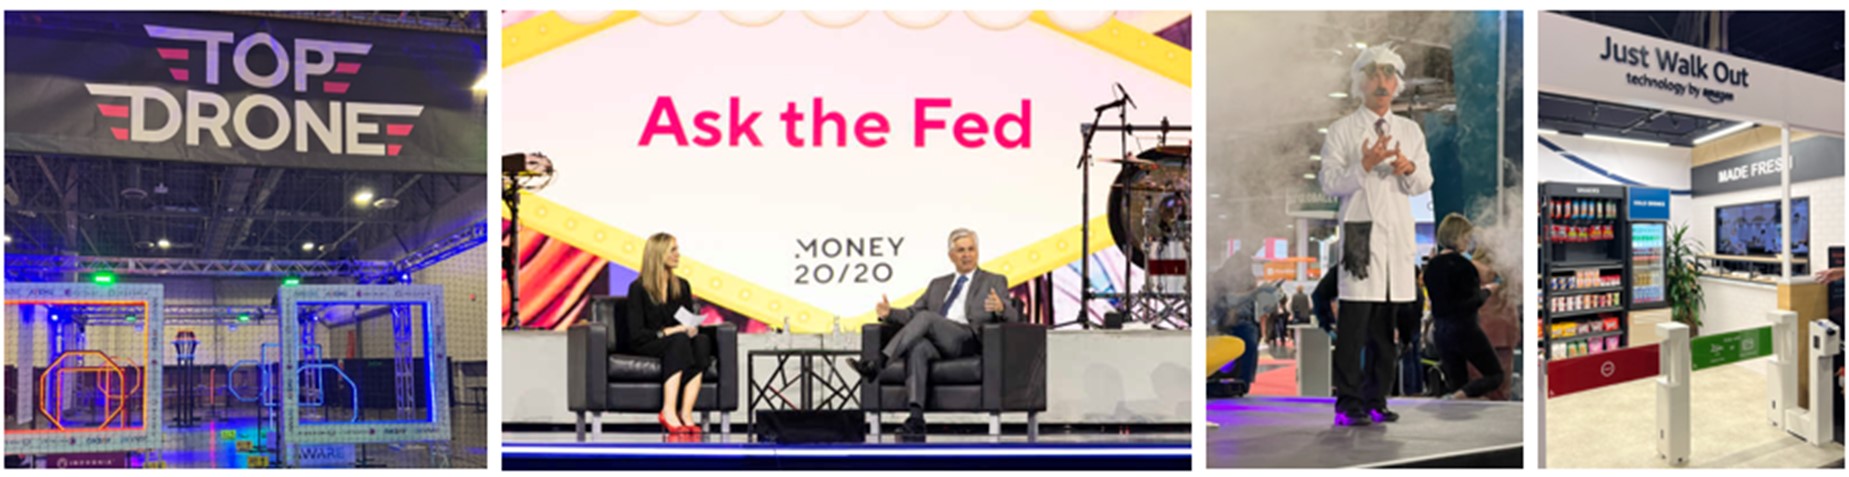 MOney 20/20 Ask the Fed Pictures